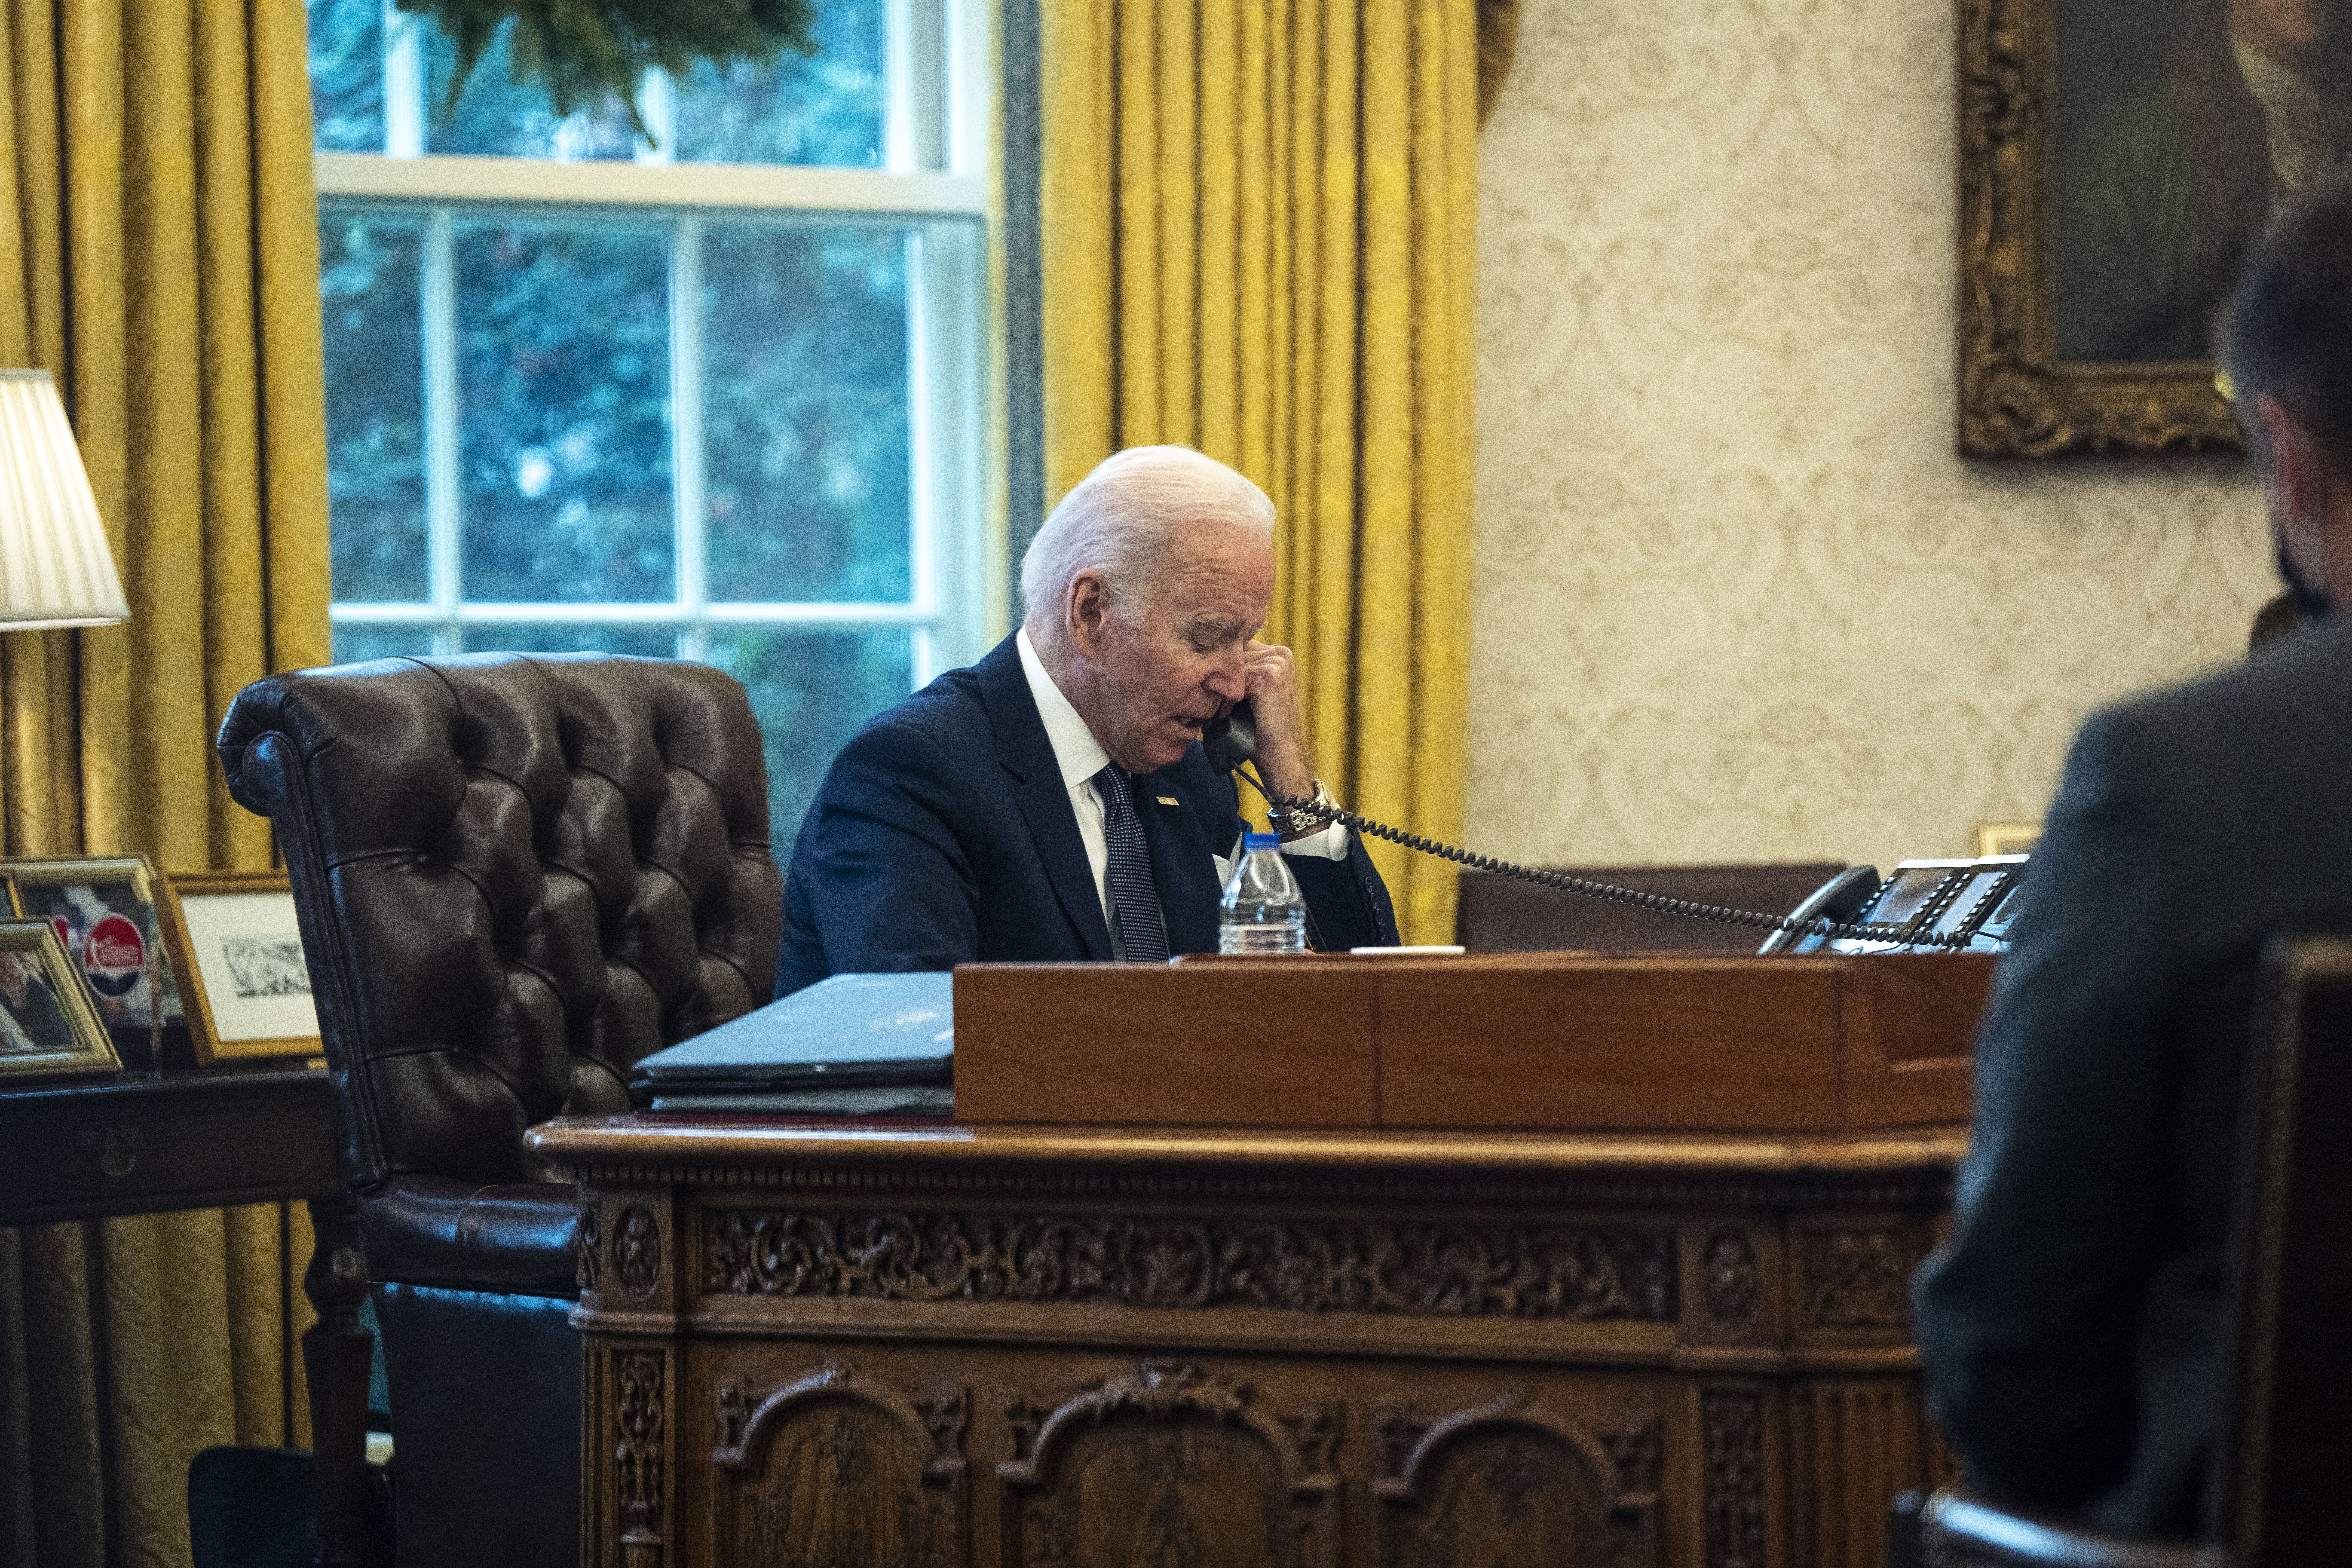 WASHINGTON, DC - DECEMBER 09: U.S. President Joe Biden talks on the phone with Ukrainian President Volodymyr Zelensky from the Oval Office at the White House on December 09, 2021 in Washington, DC. According to the White House, Biden and Zelensky discussed Russia’s military build-up on Ukraine’s borders. (Photo by Doug Mills-Pool/Getty Images)